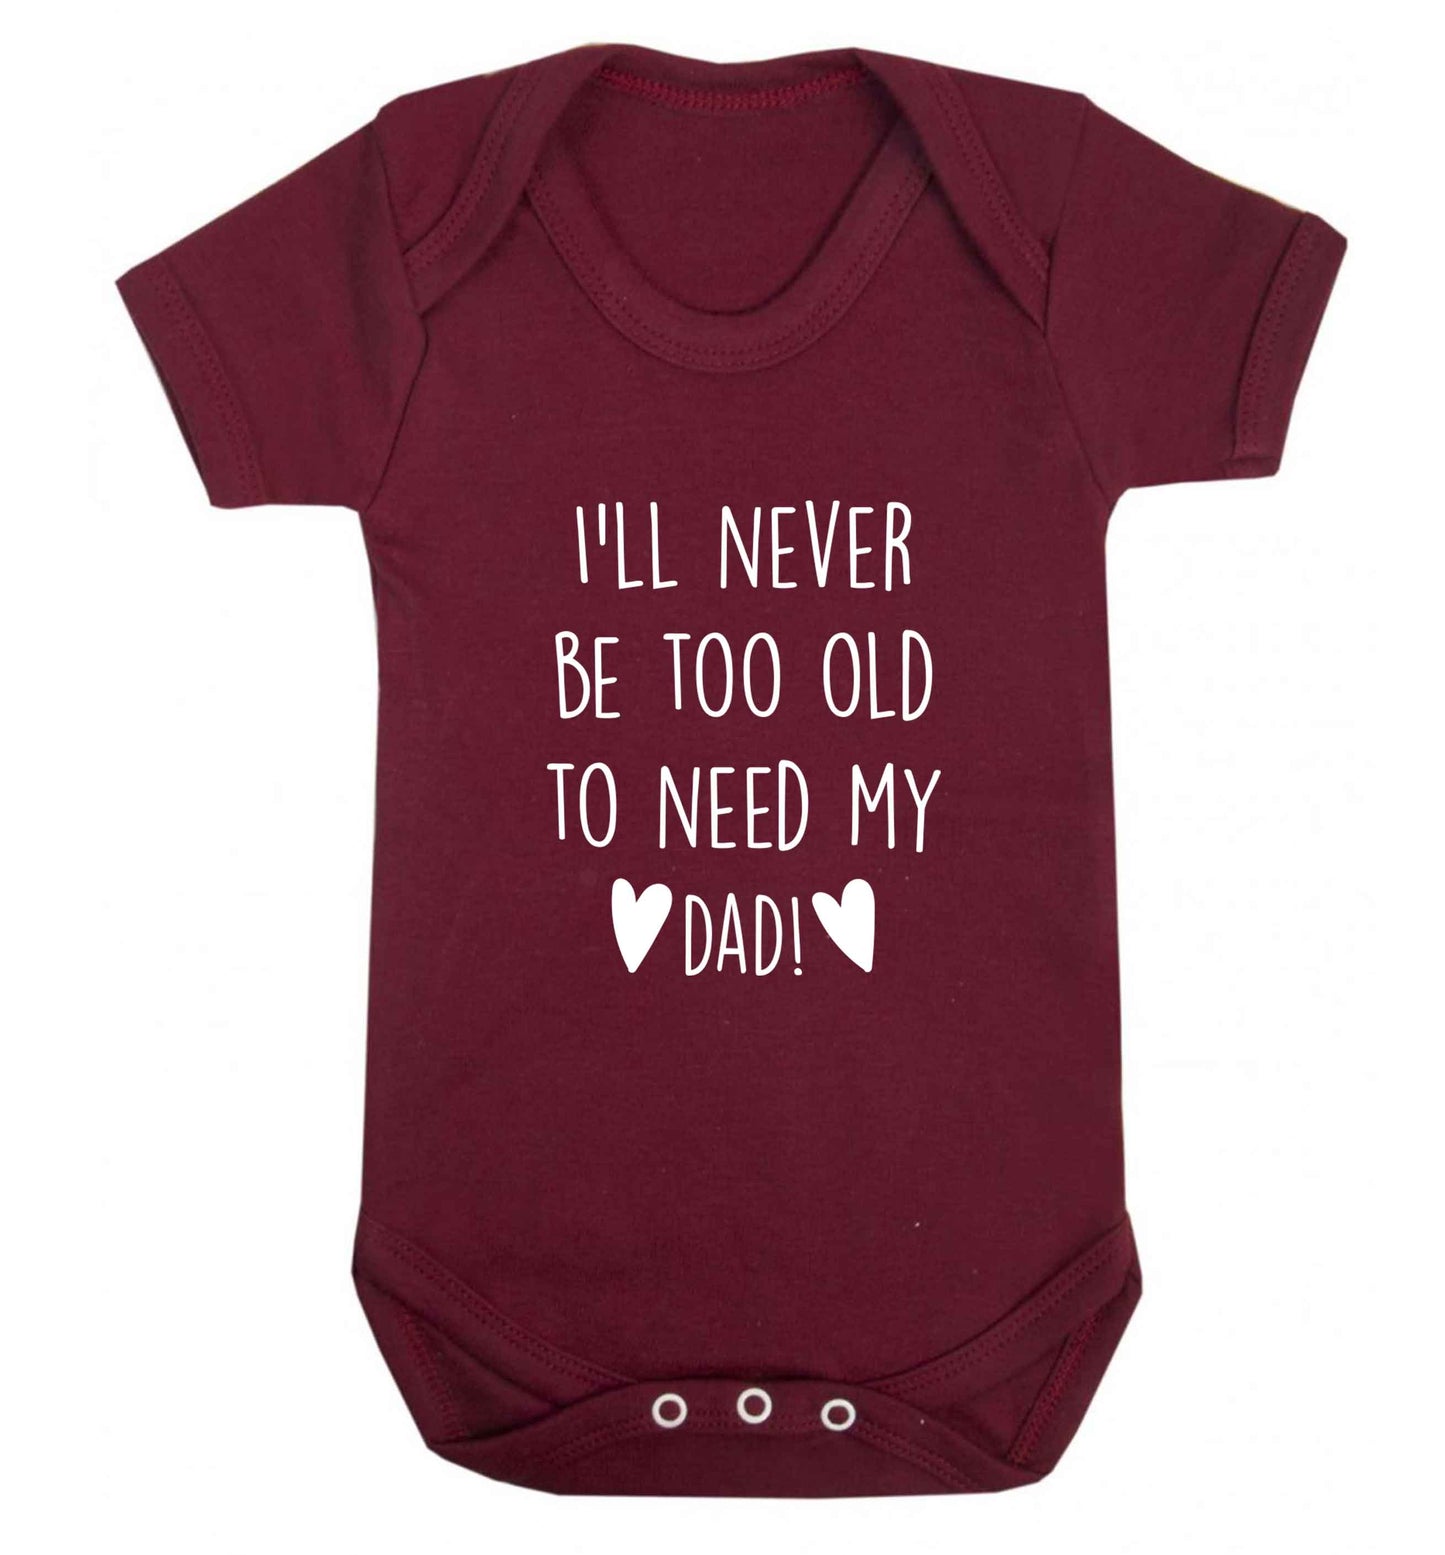 I'll never be too old to need my dad baby vest maroon 18-24 months